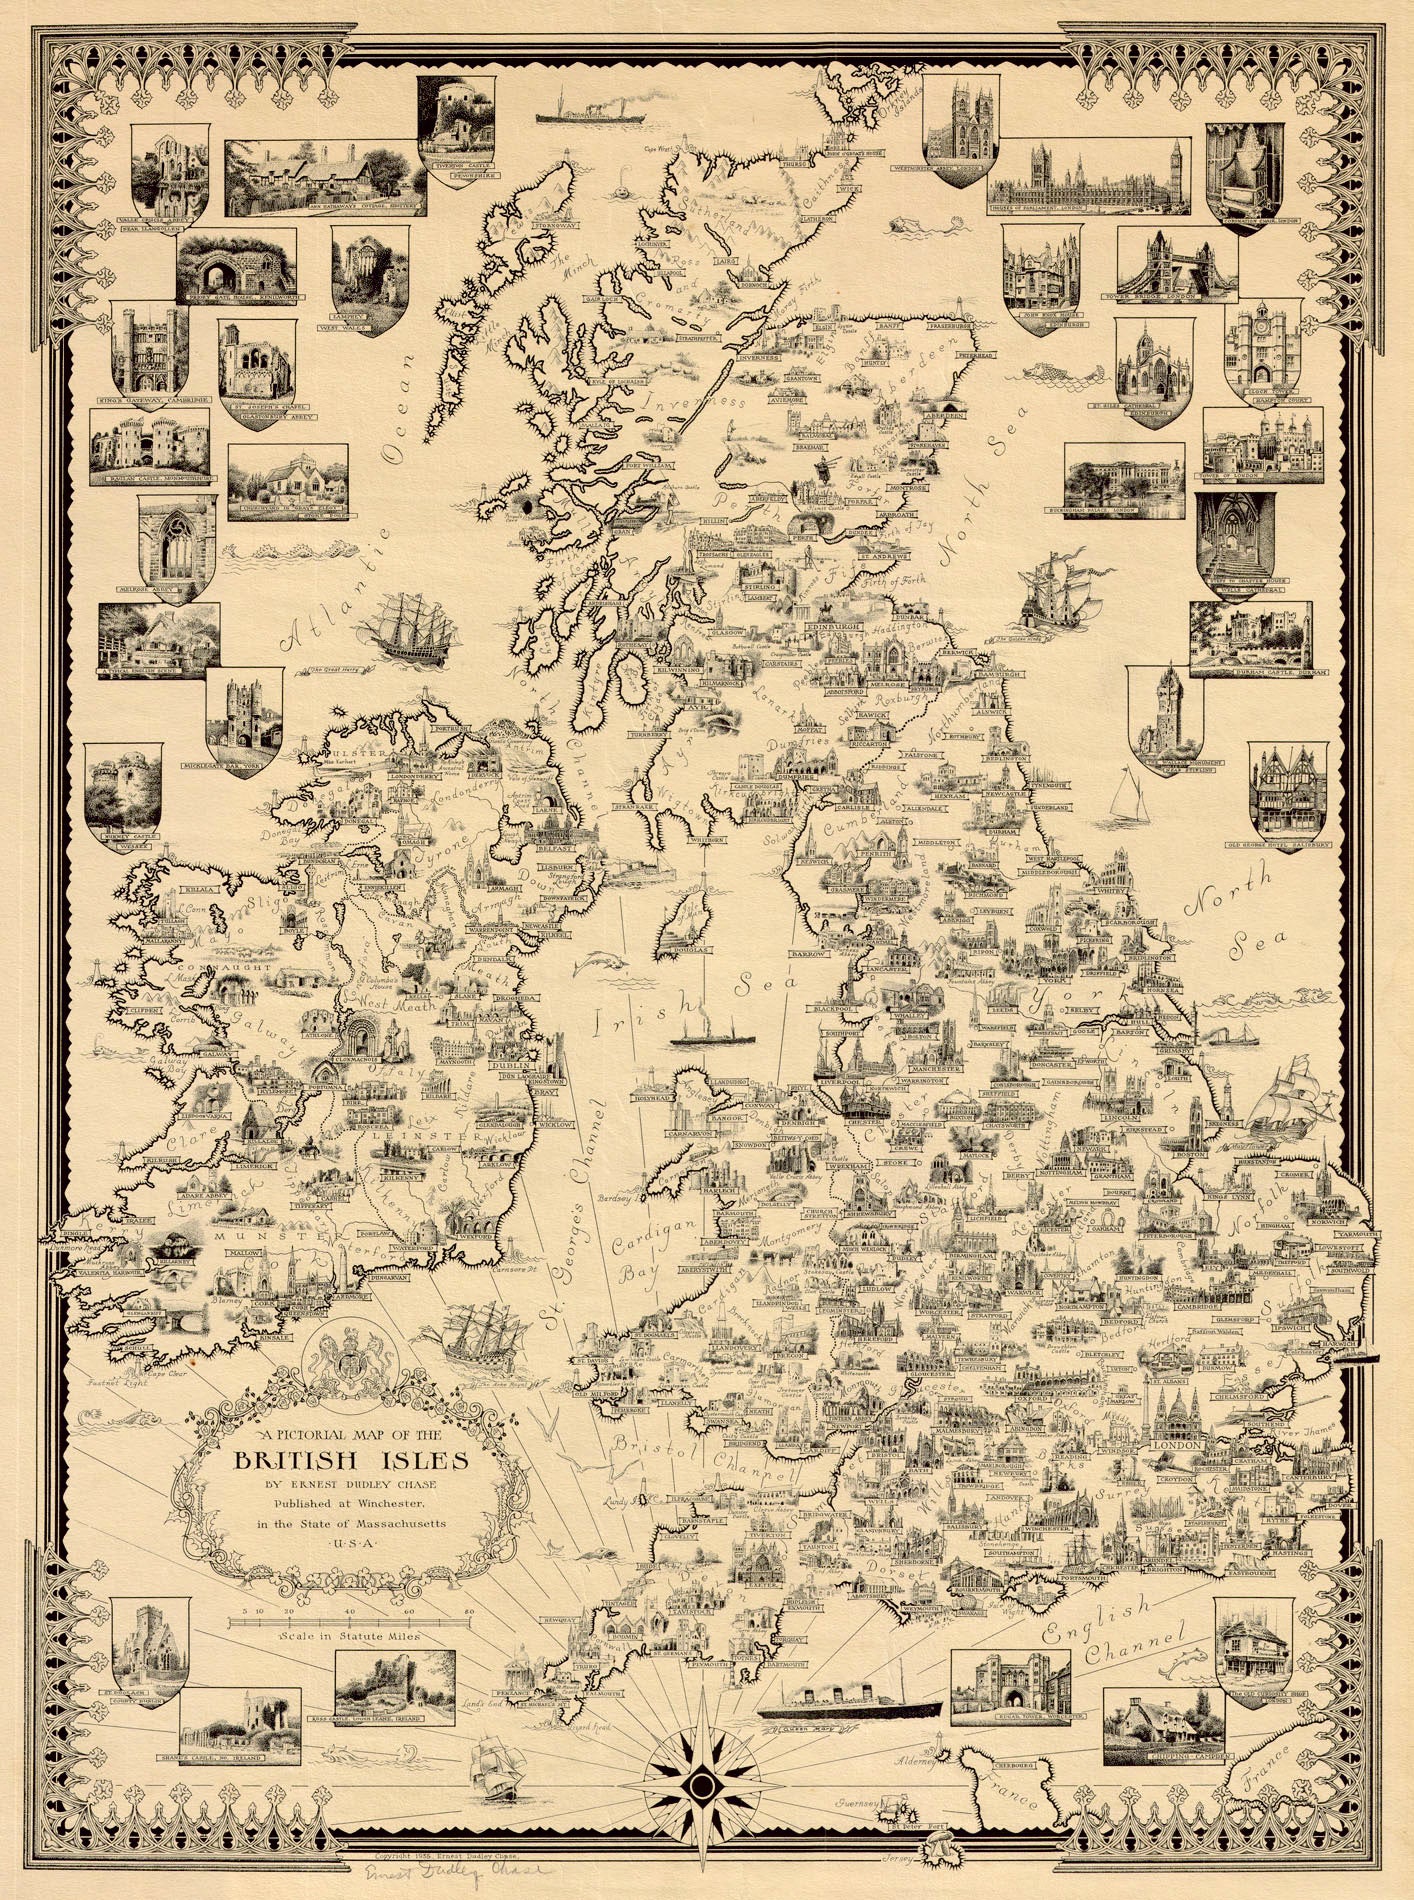 (Britain) A Pictorial Map of the British Isles